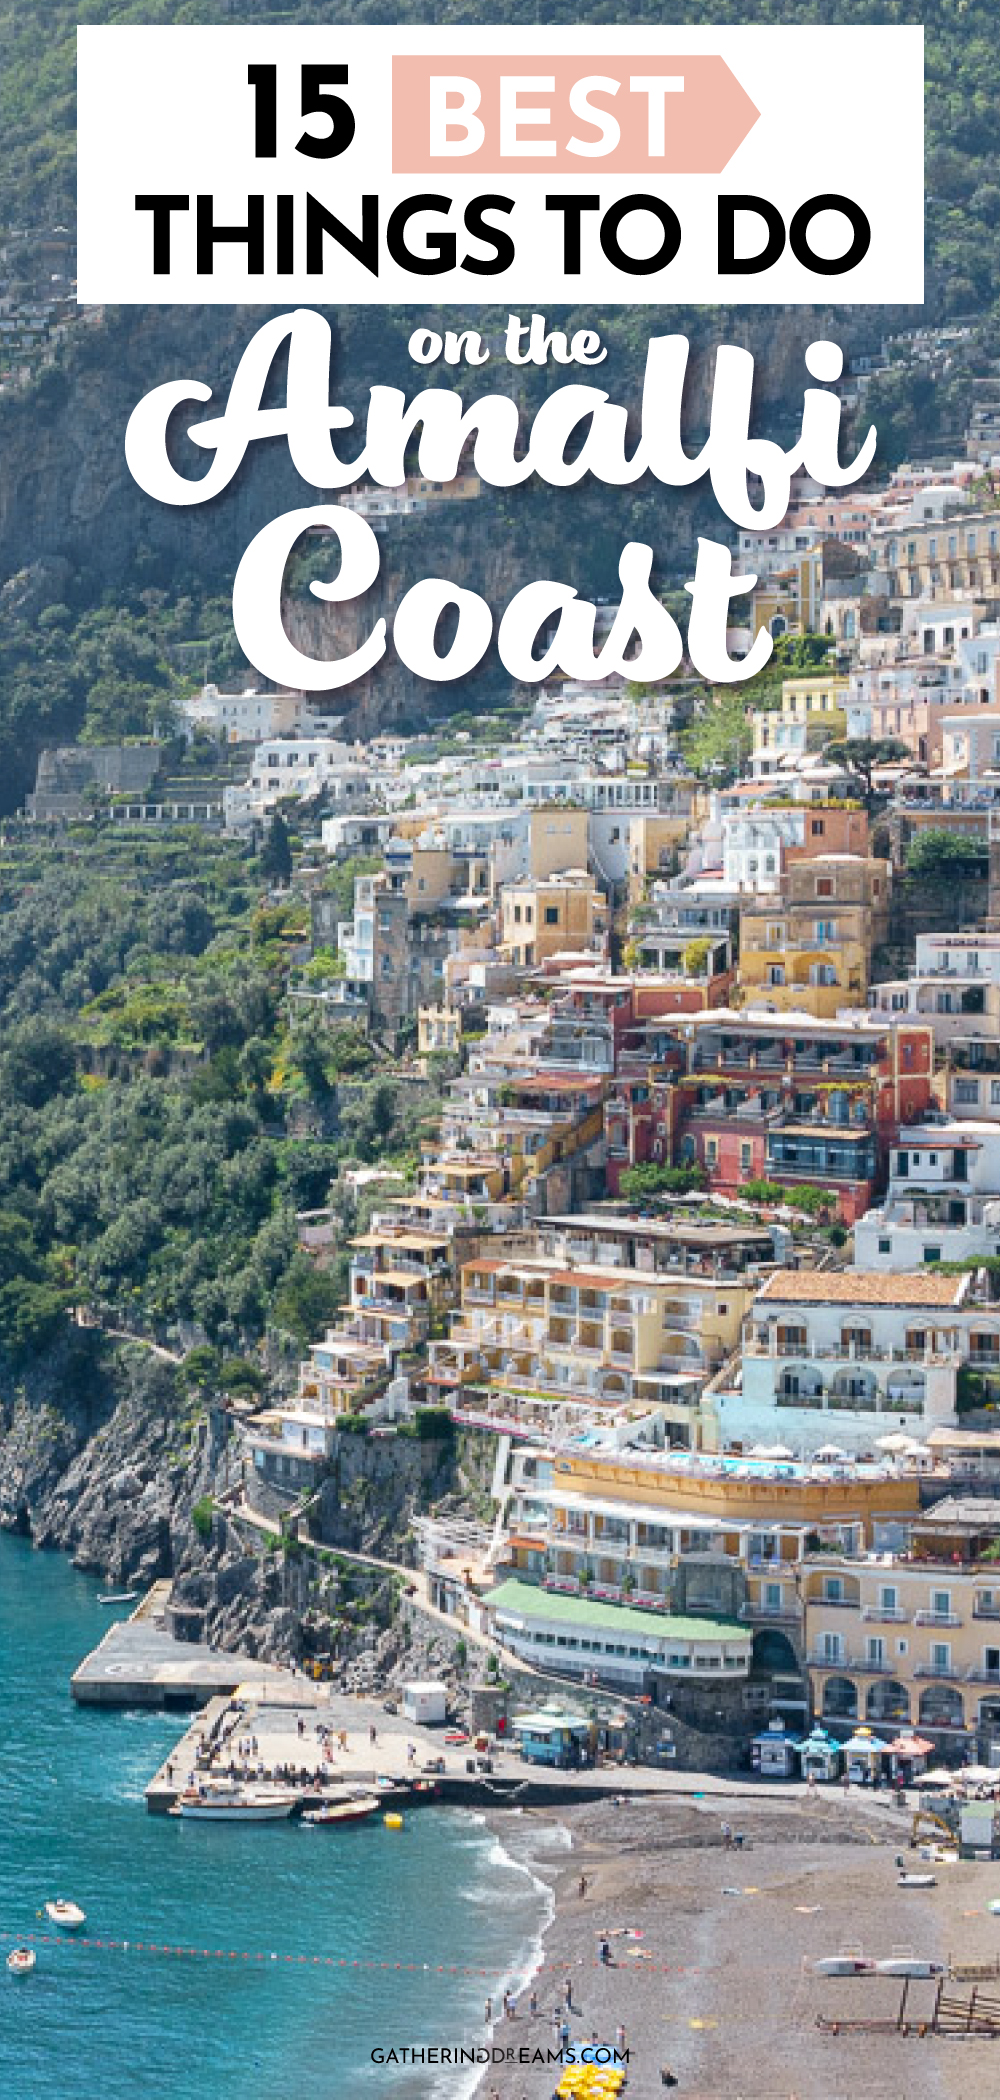 15 Best Things To Do On The Amalfi Coast (Tips From An Italian)